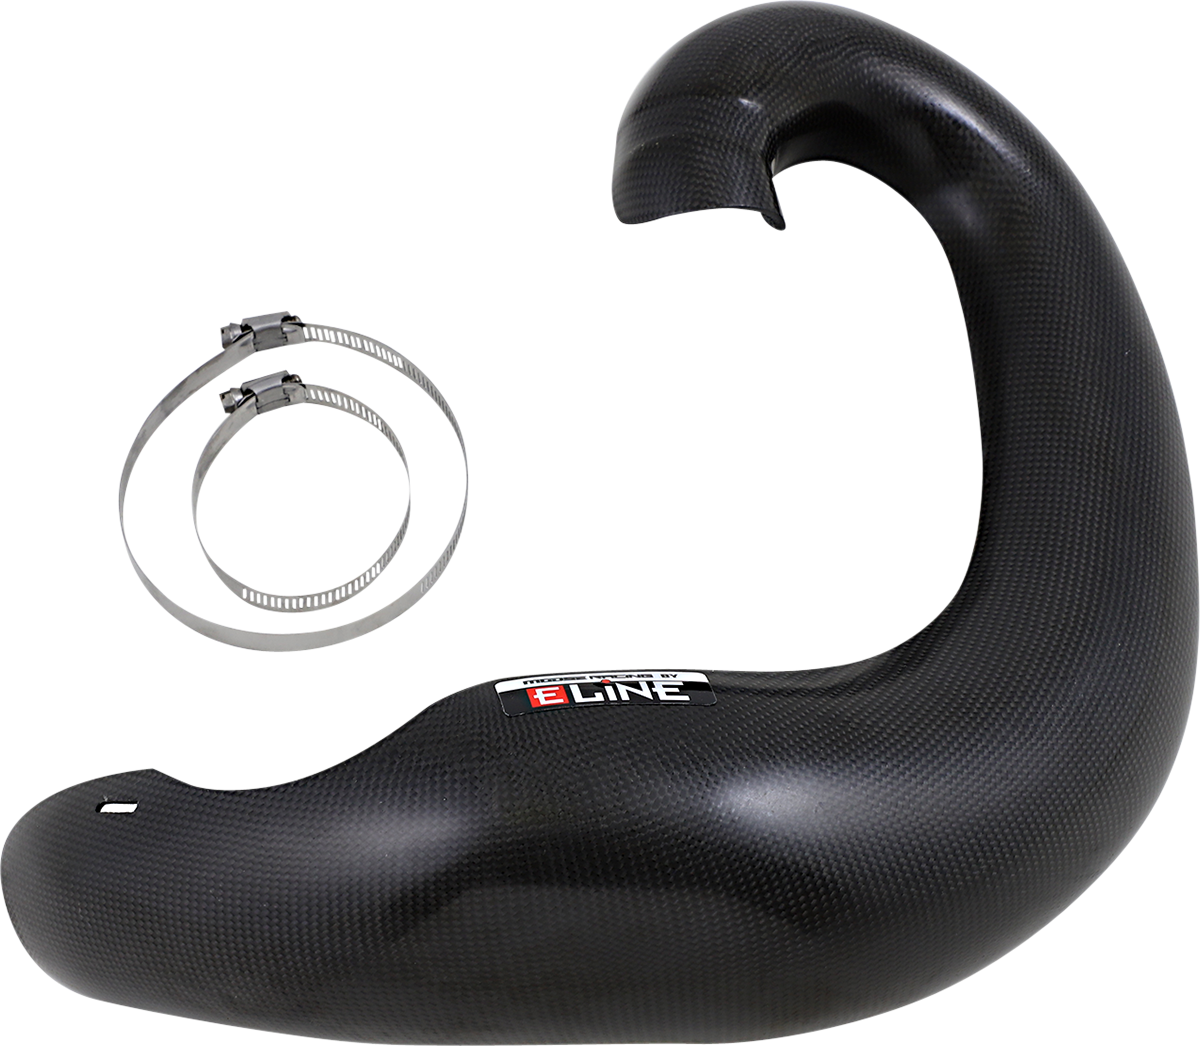 MOOSE RACING Pipe Guard - FMF Gnarly MPG203